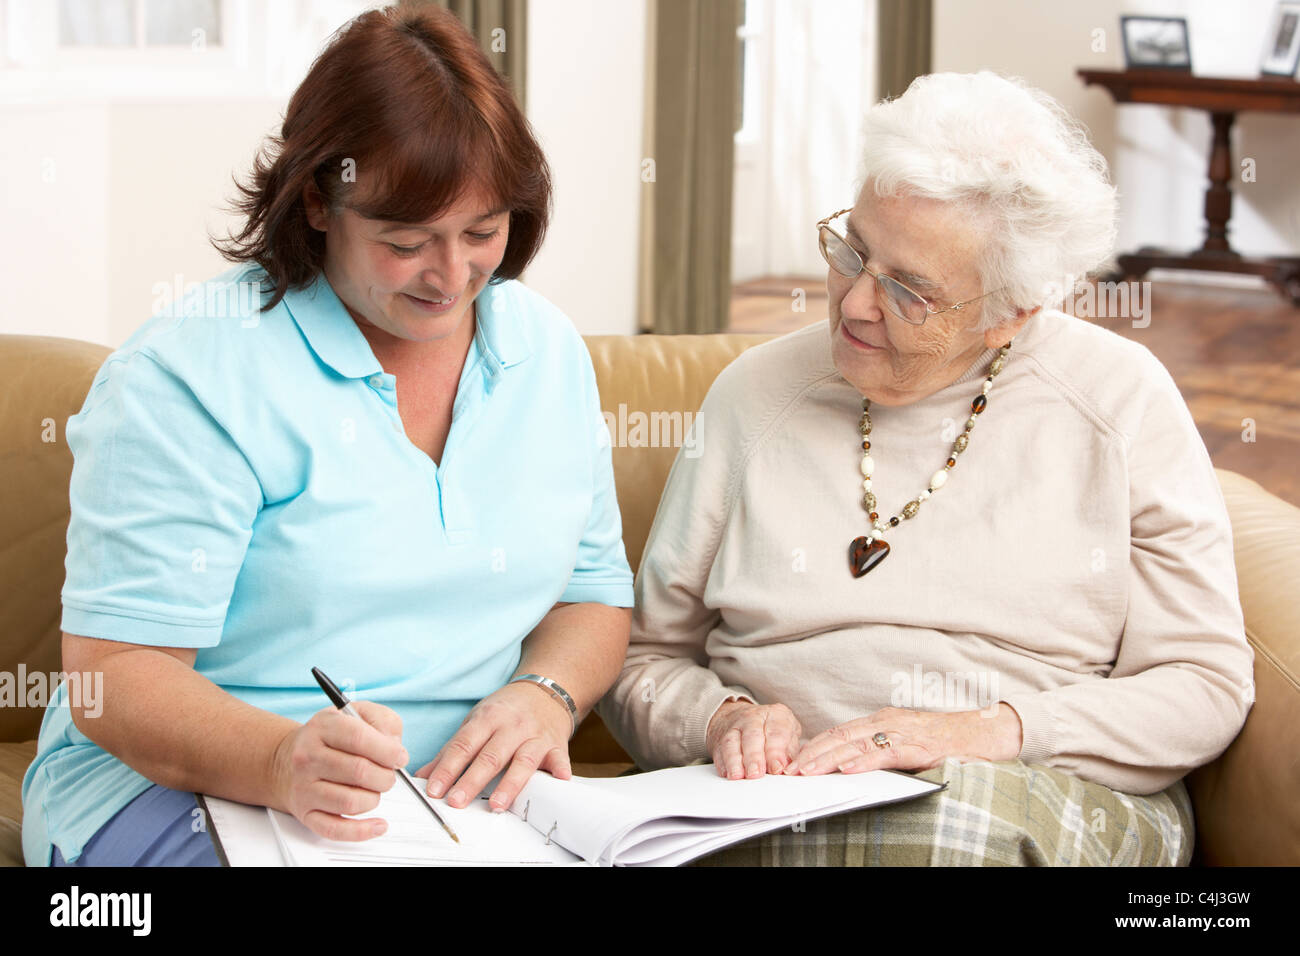 Senior Woman In Discussion With Health Visitor At Home Stock Photo